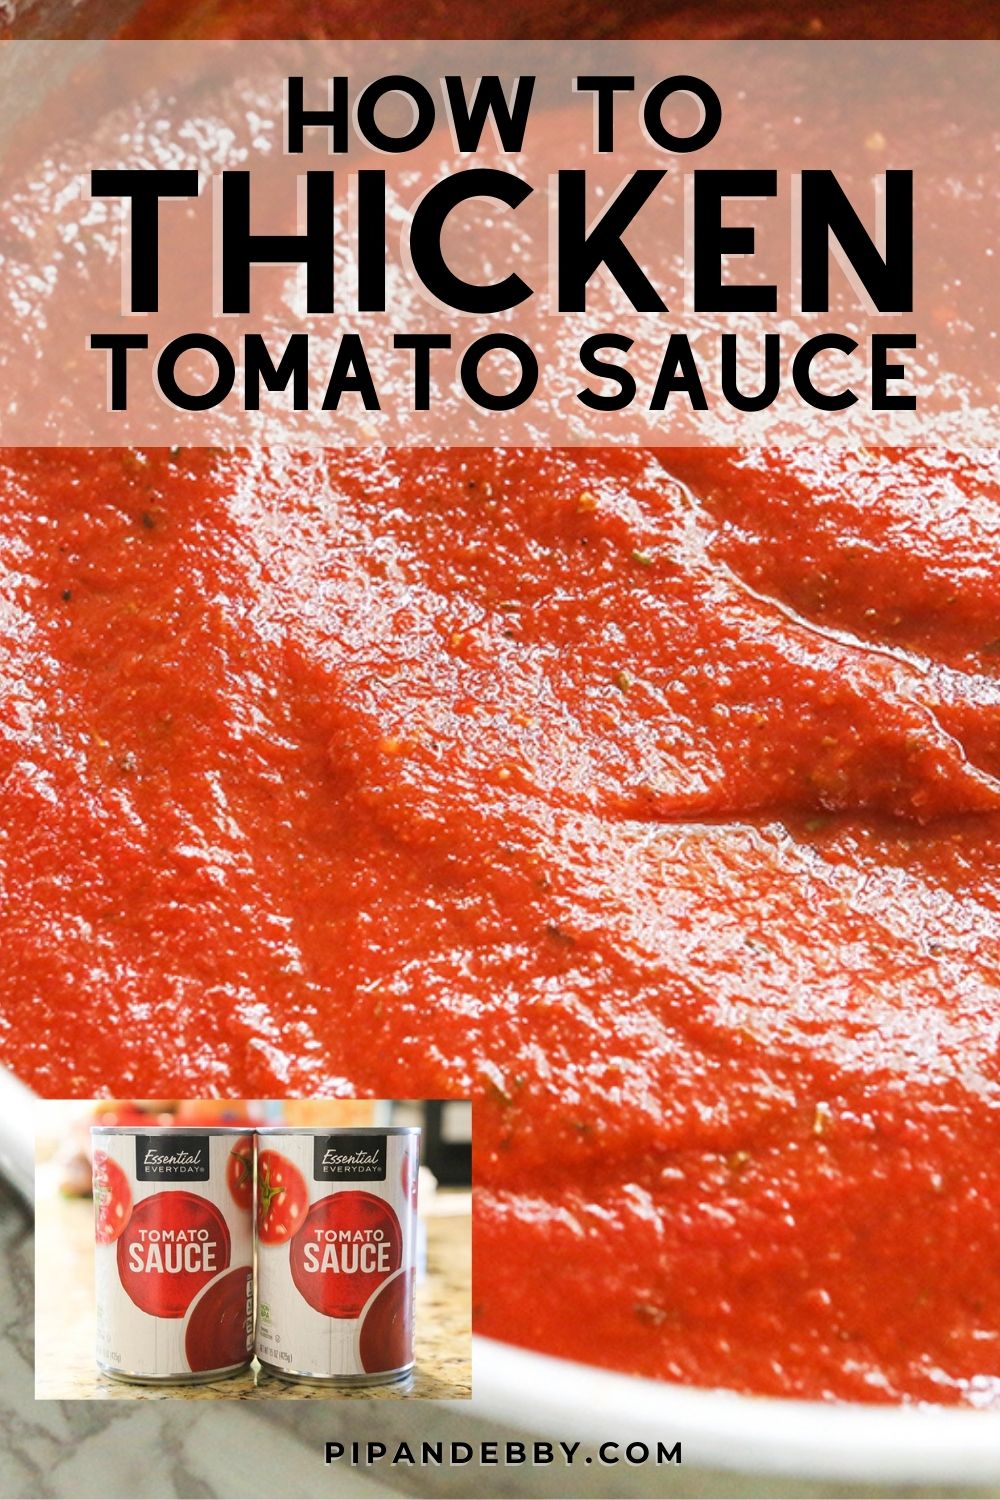 Giant pan of red sauce with text overlay reading, "How to thicken tomato sauce."